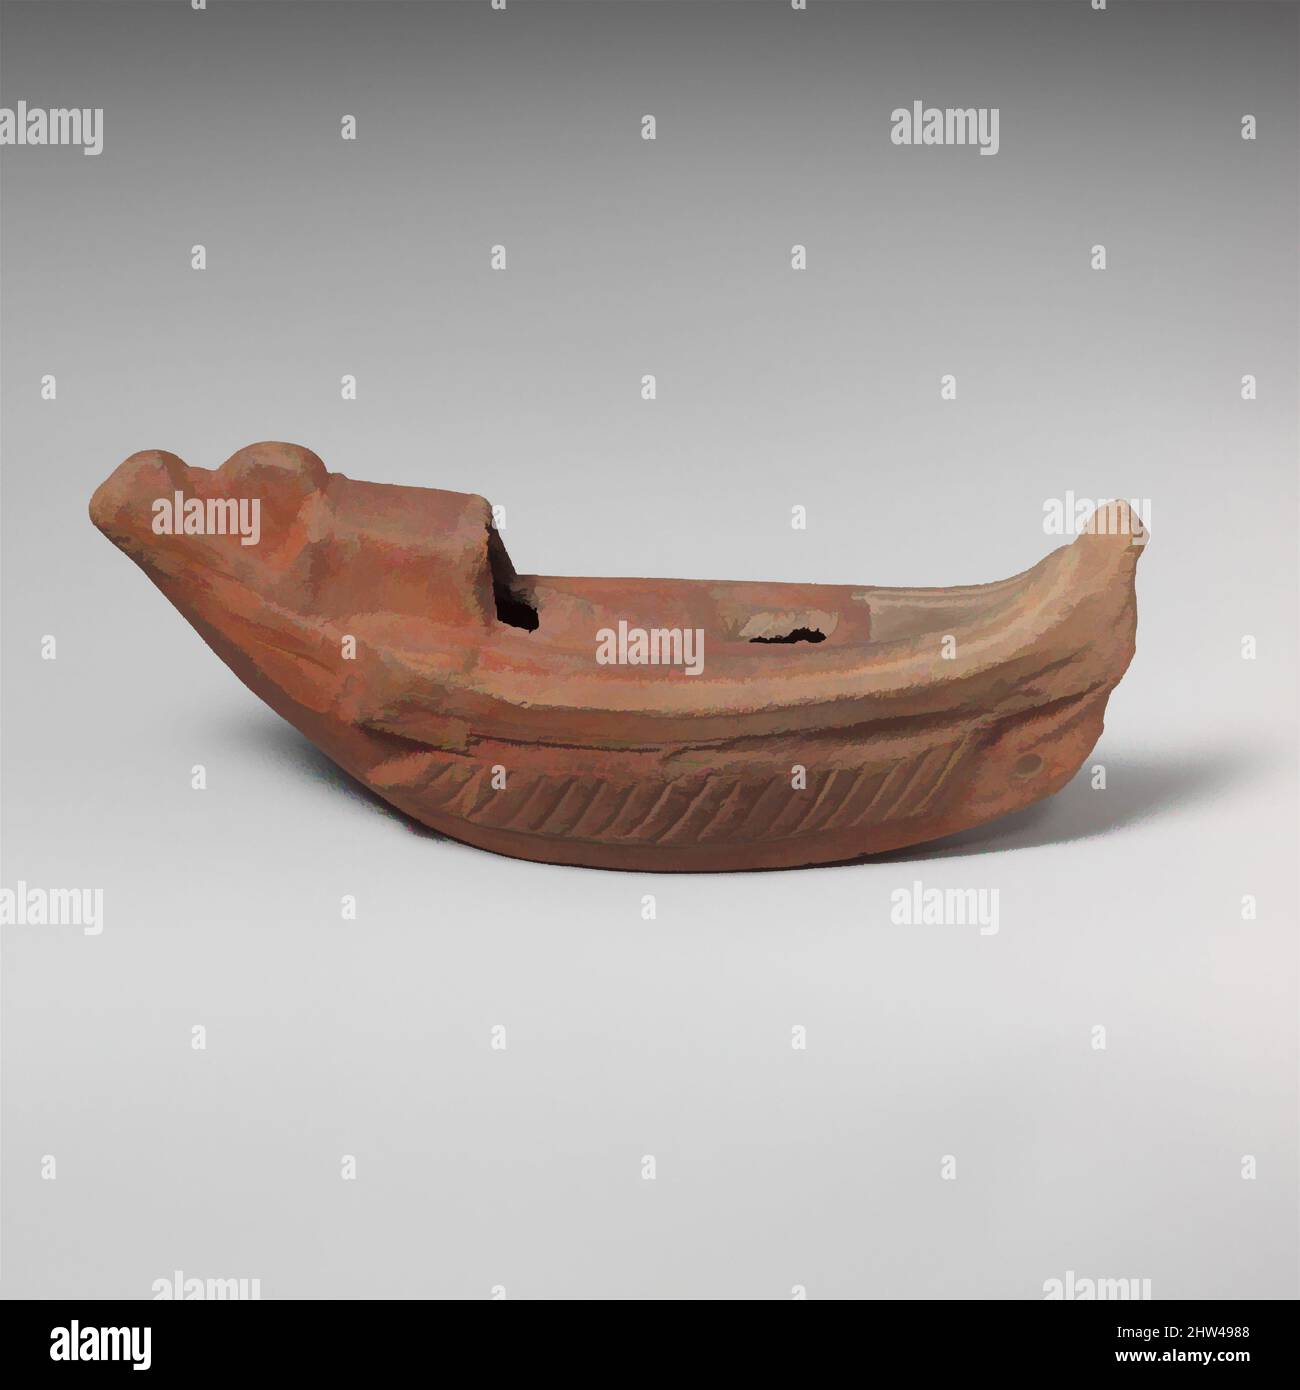 Art inspired by Terracotta oil lamp in the shape of a boat, Mid Imperial, 2nd century A.D., Roman, Egyptian, Terracotta, length 6 1/4in. (15.9cm), Terracottas, Lamp in the form of a boat, Classic works modernized by Artotop with a splash of modernity. Shapes, color and value, eye-catching visual impact on art. Emotions through freedom of artworks in a contemporary way. A timeless message pursuing a wildly creative new direction. Artists turning to the digital medium and creating the Artotop NFT Stock Photo